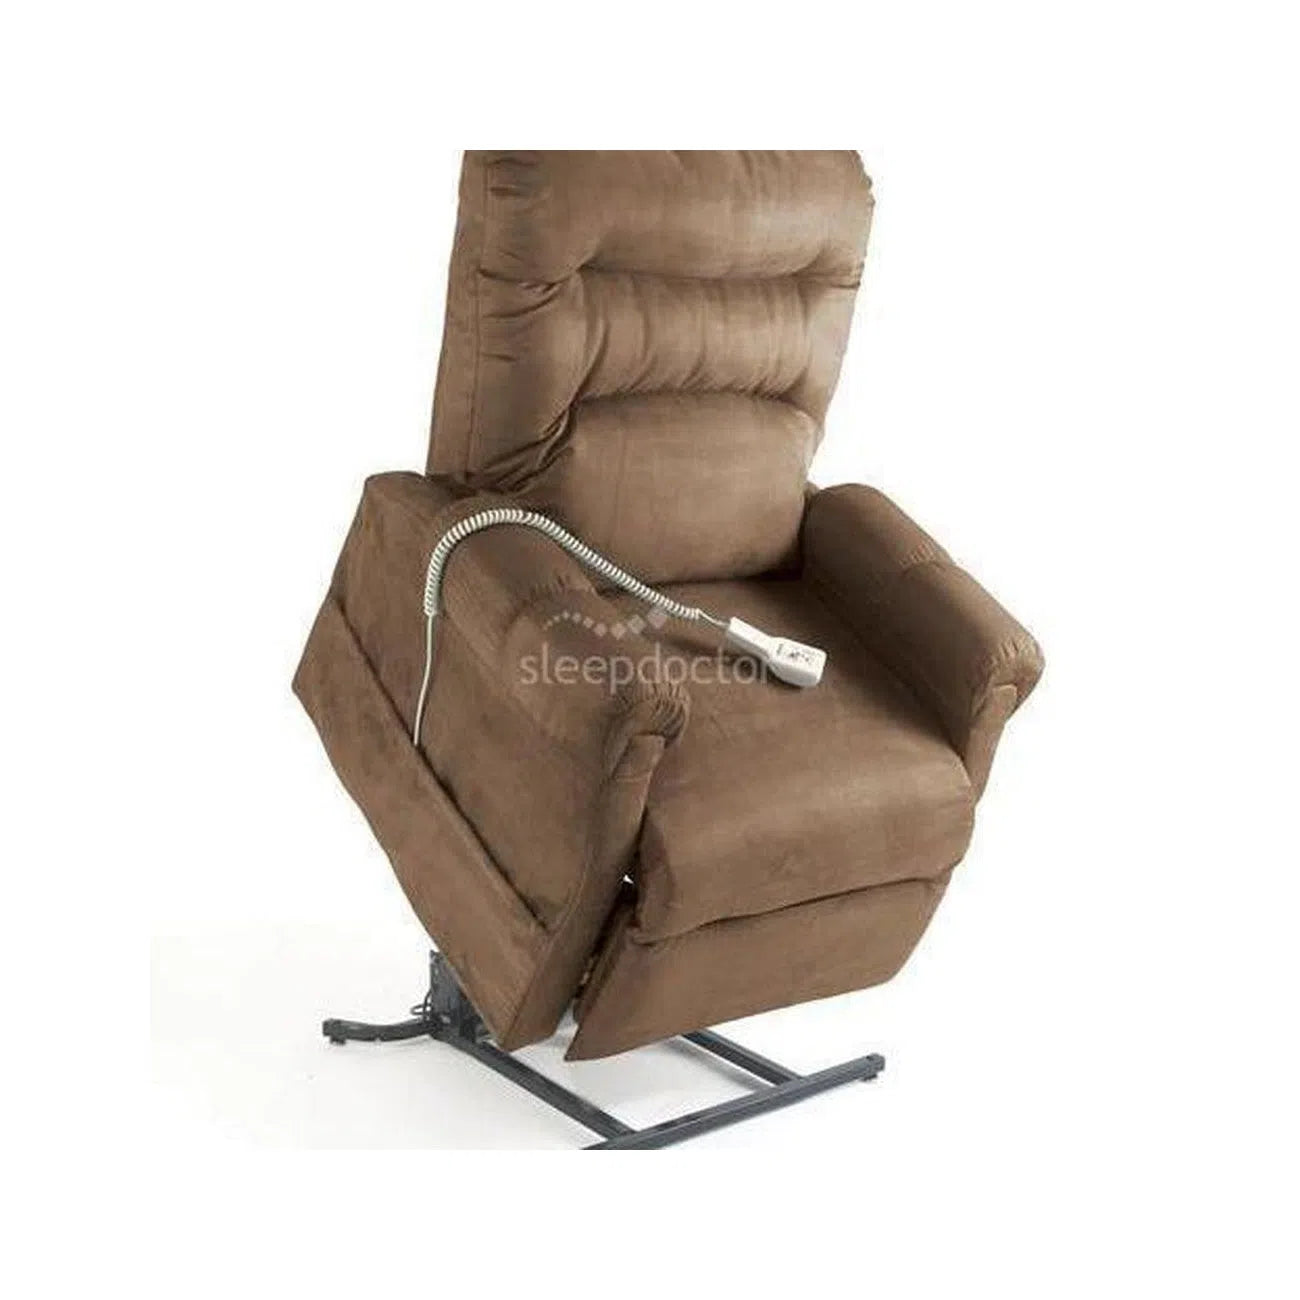 C6 Electric Dual Motor Lift Chair by Pride Moblity-Sleep Doctor